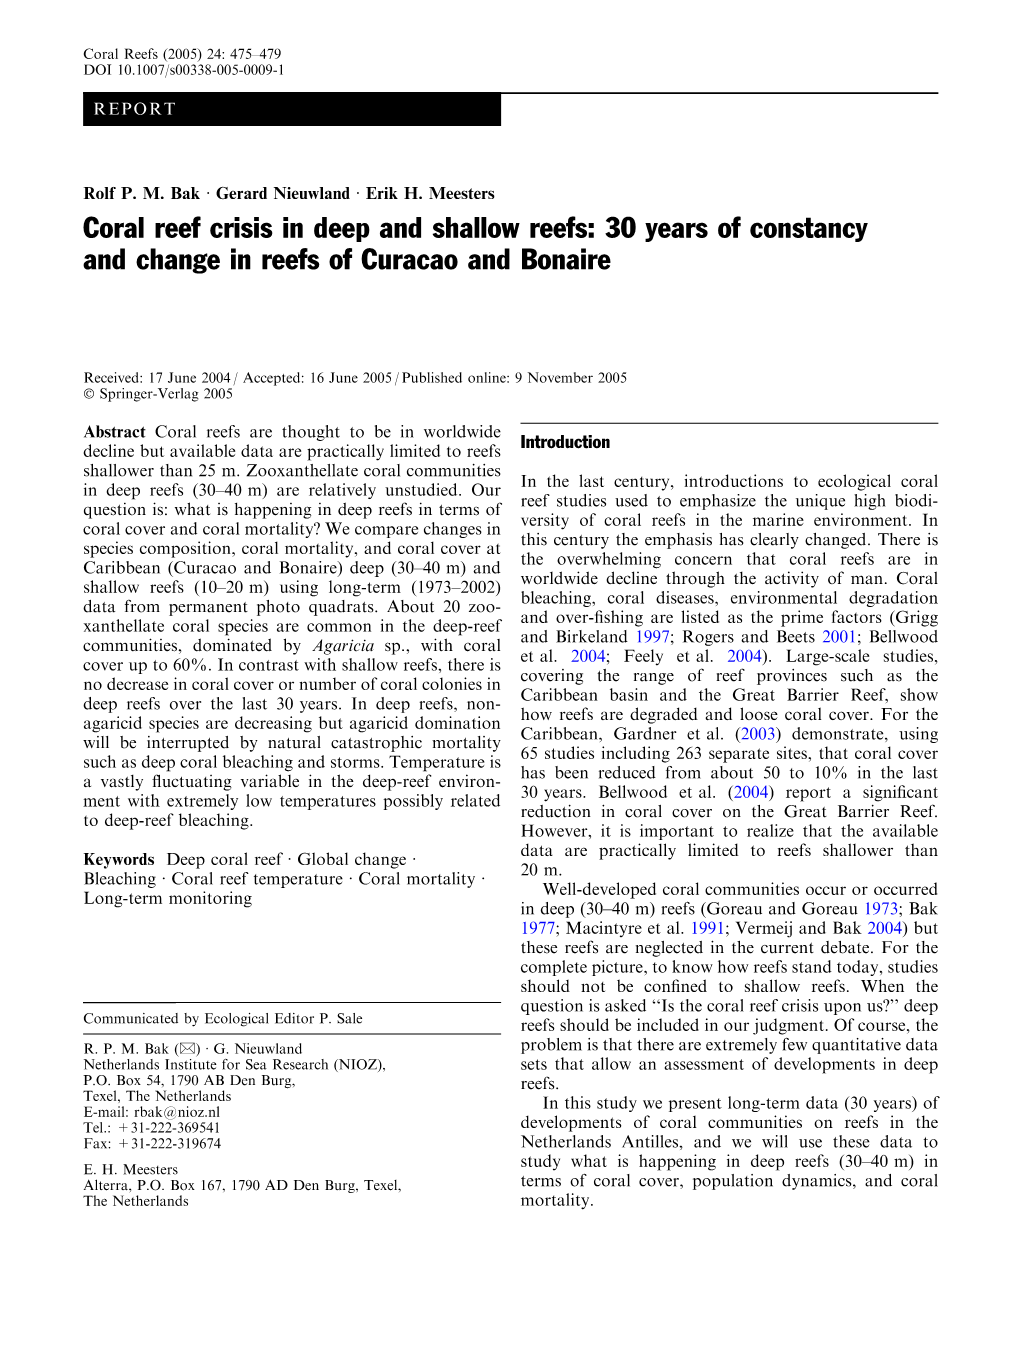 Coral Reef Crisis in Deep and Shallow Reefs: 30 Years of Constancy and Change in Reefs of Curacao and Bonaire